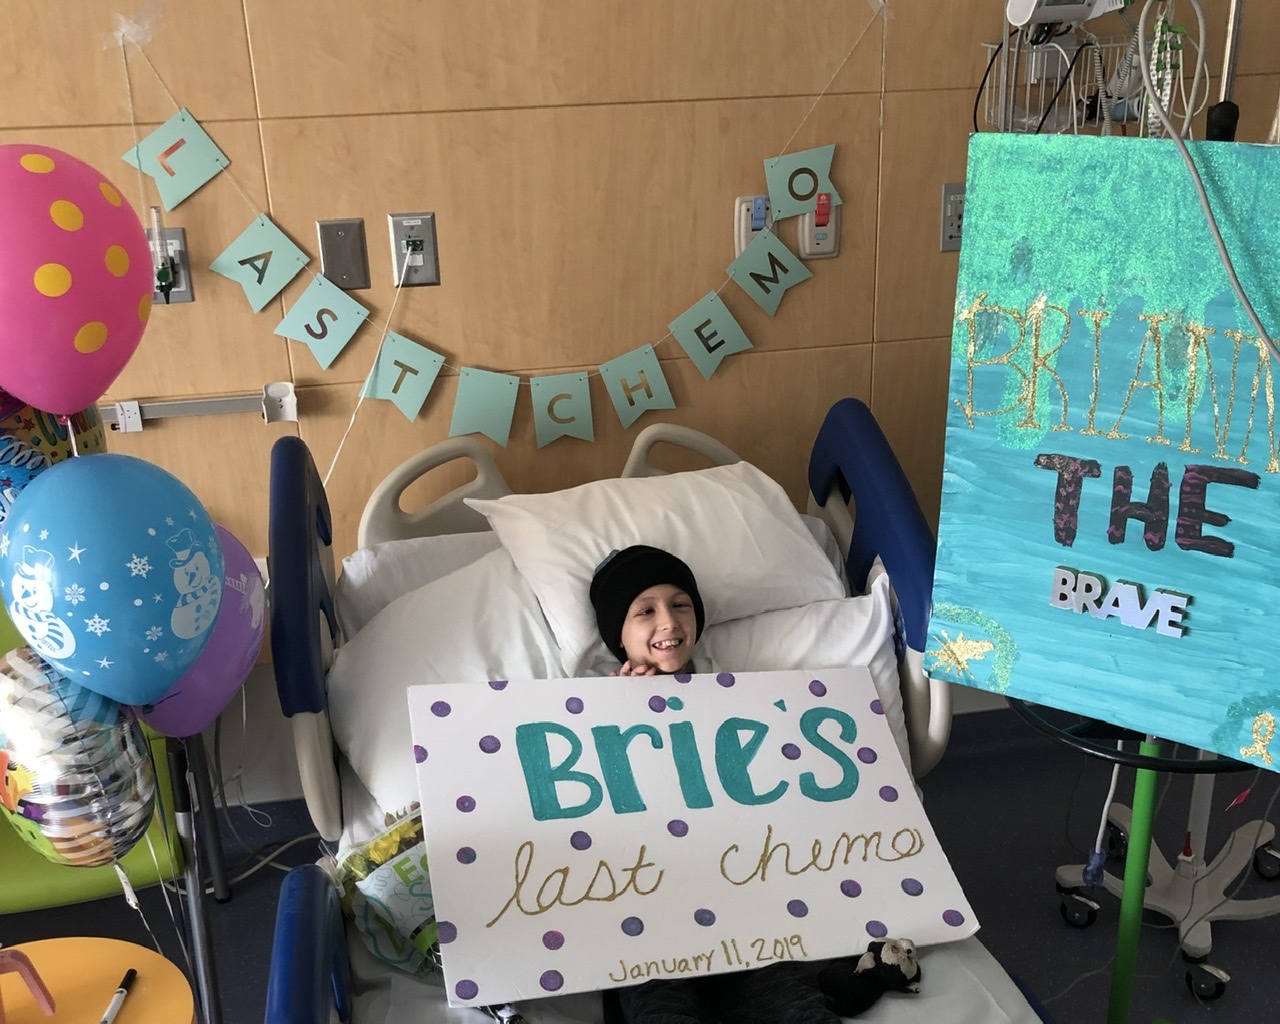 Brianna in a hospital bed with signs that say, Bries, last chemo January 11, 2019